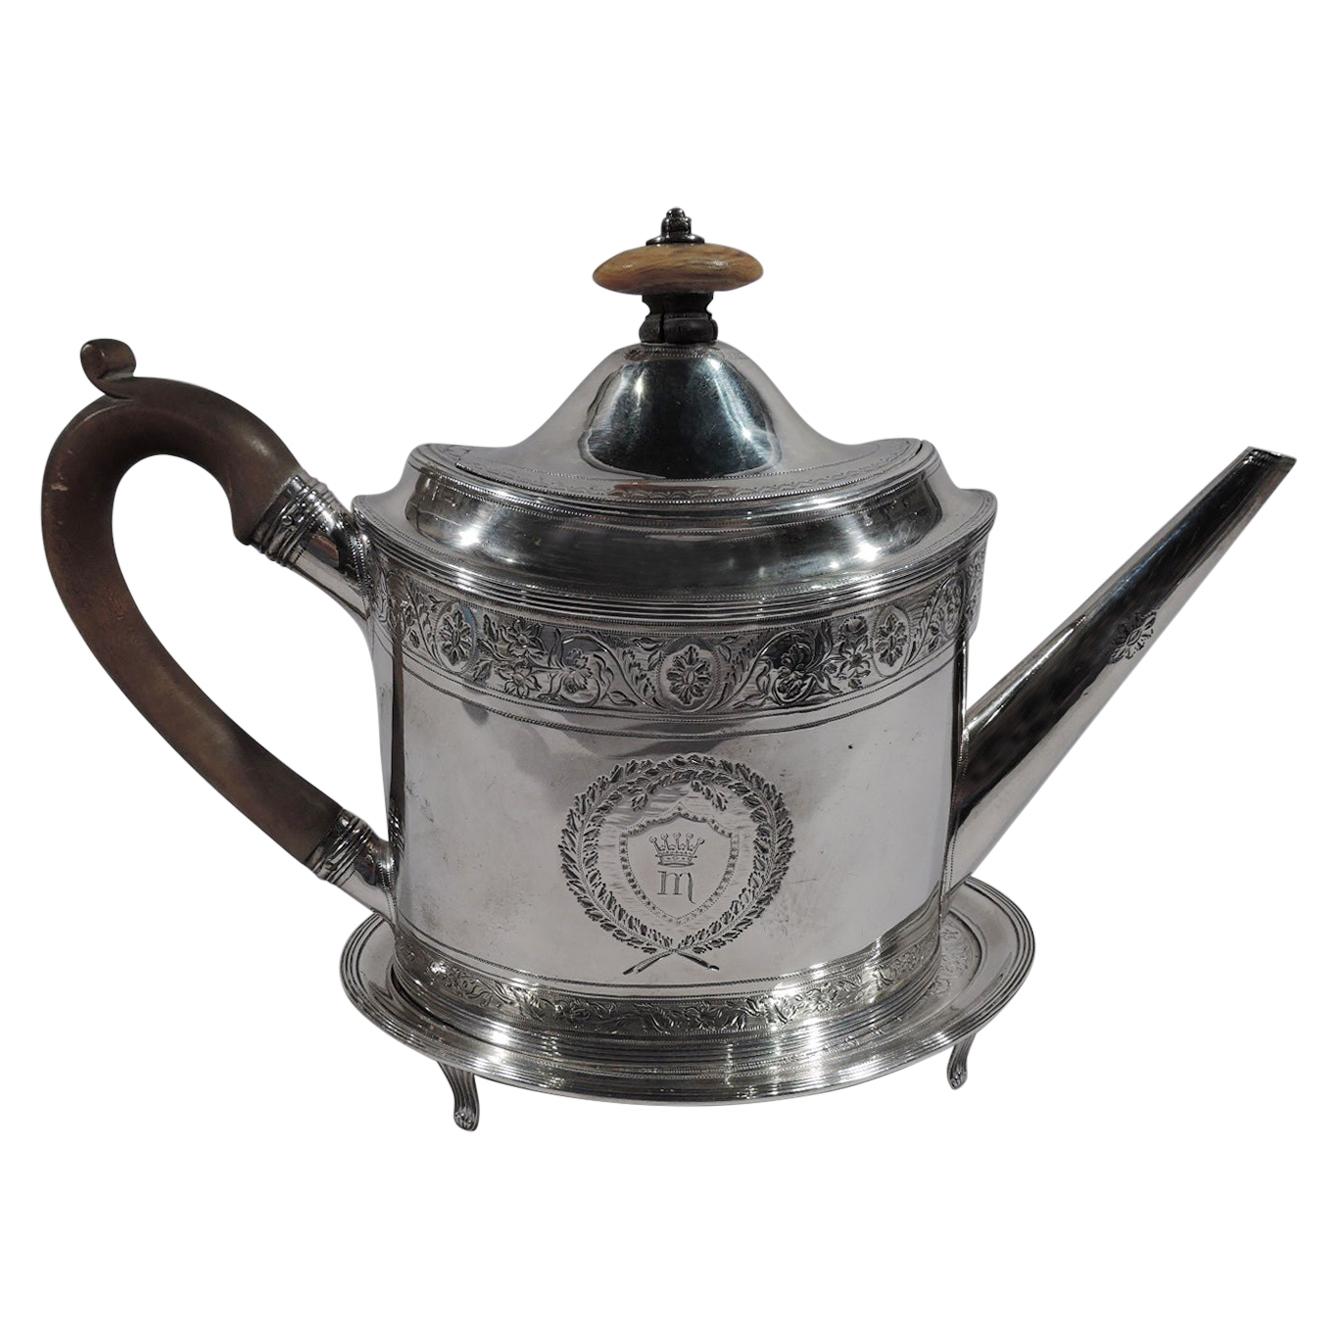 Peter and Ann Bateman Neoclassical Sterling Silver Teapot on Stand